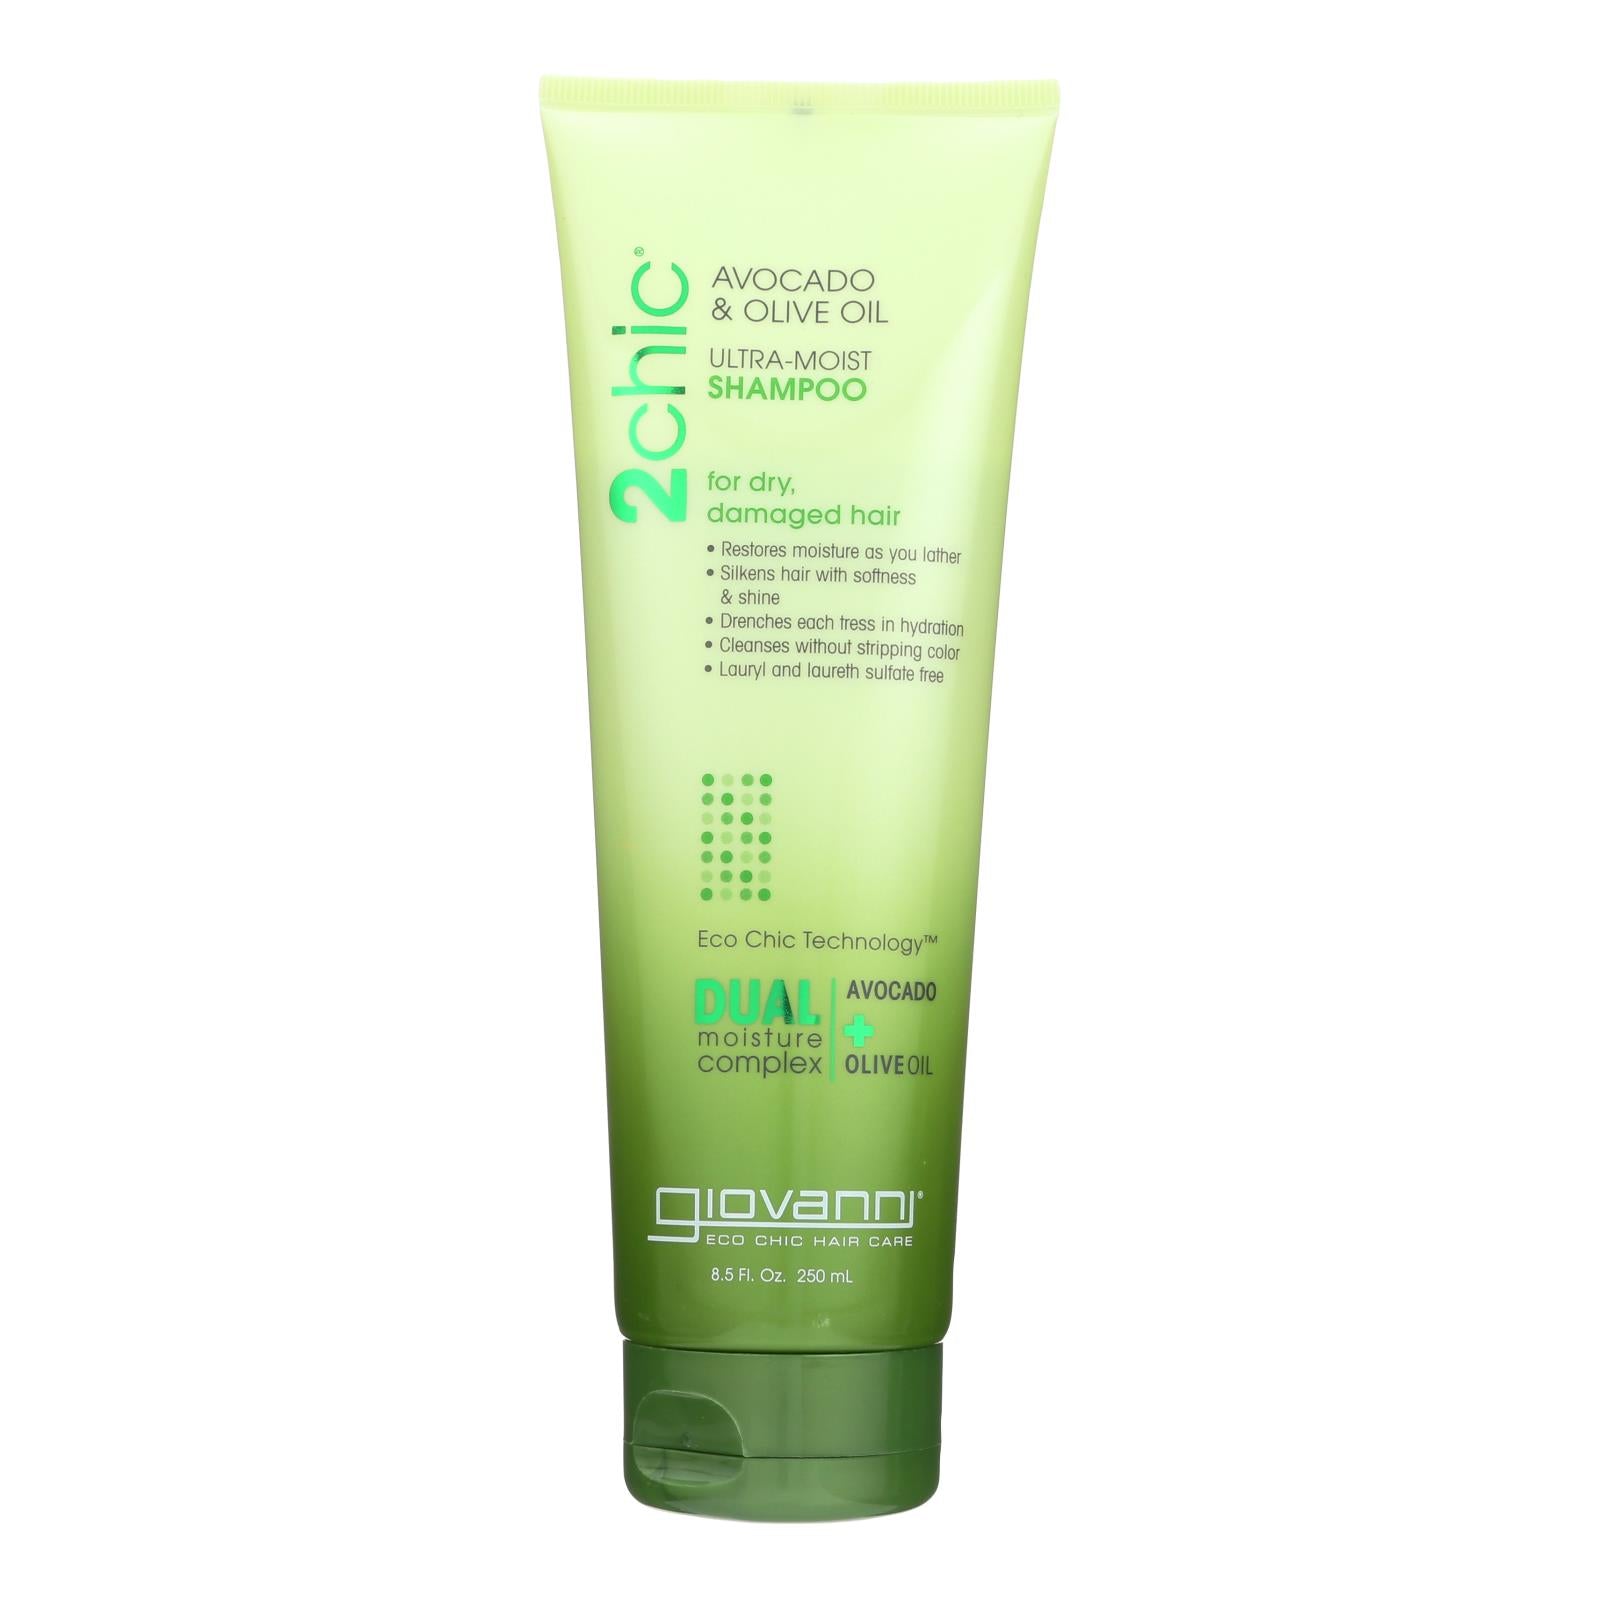 Giovanni Hair Care Products Shampoo - 2chic Avocado And Olive Oil - 8.5 Oz - Whole Green Foods